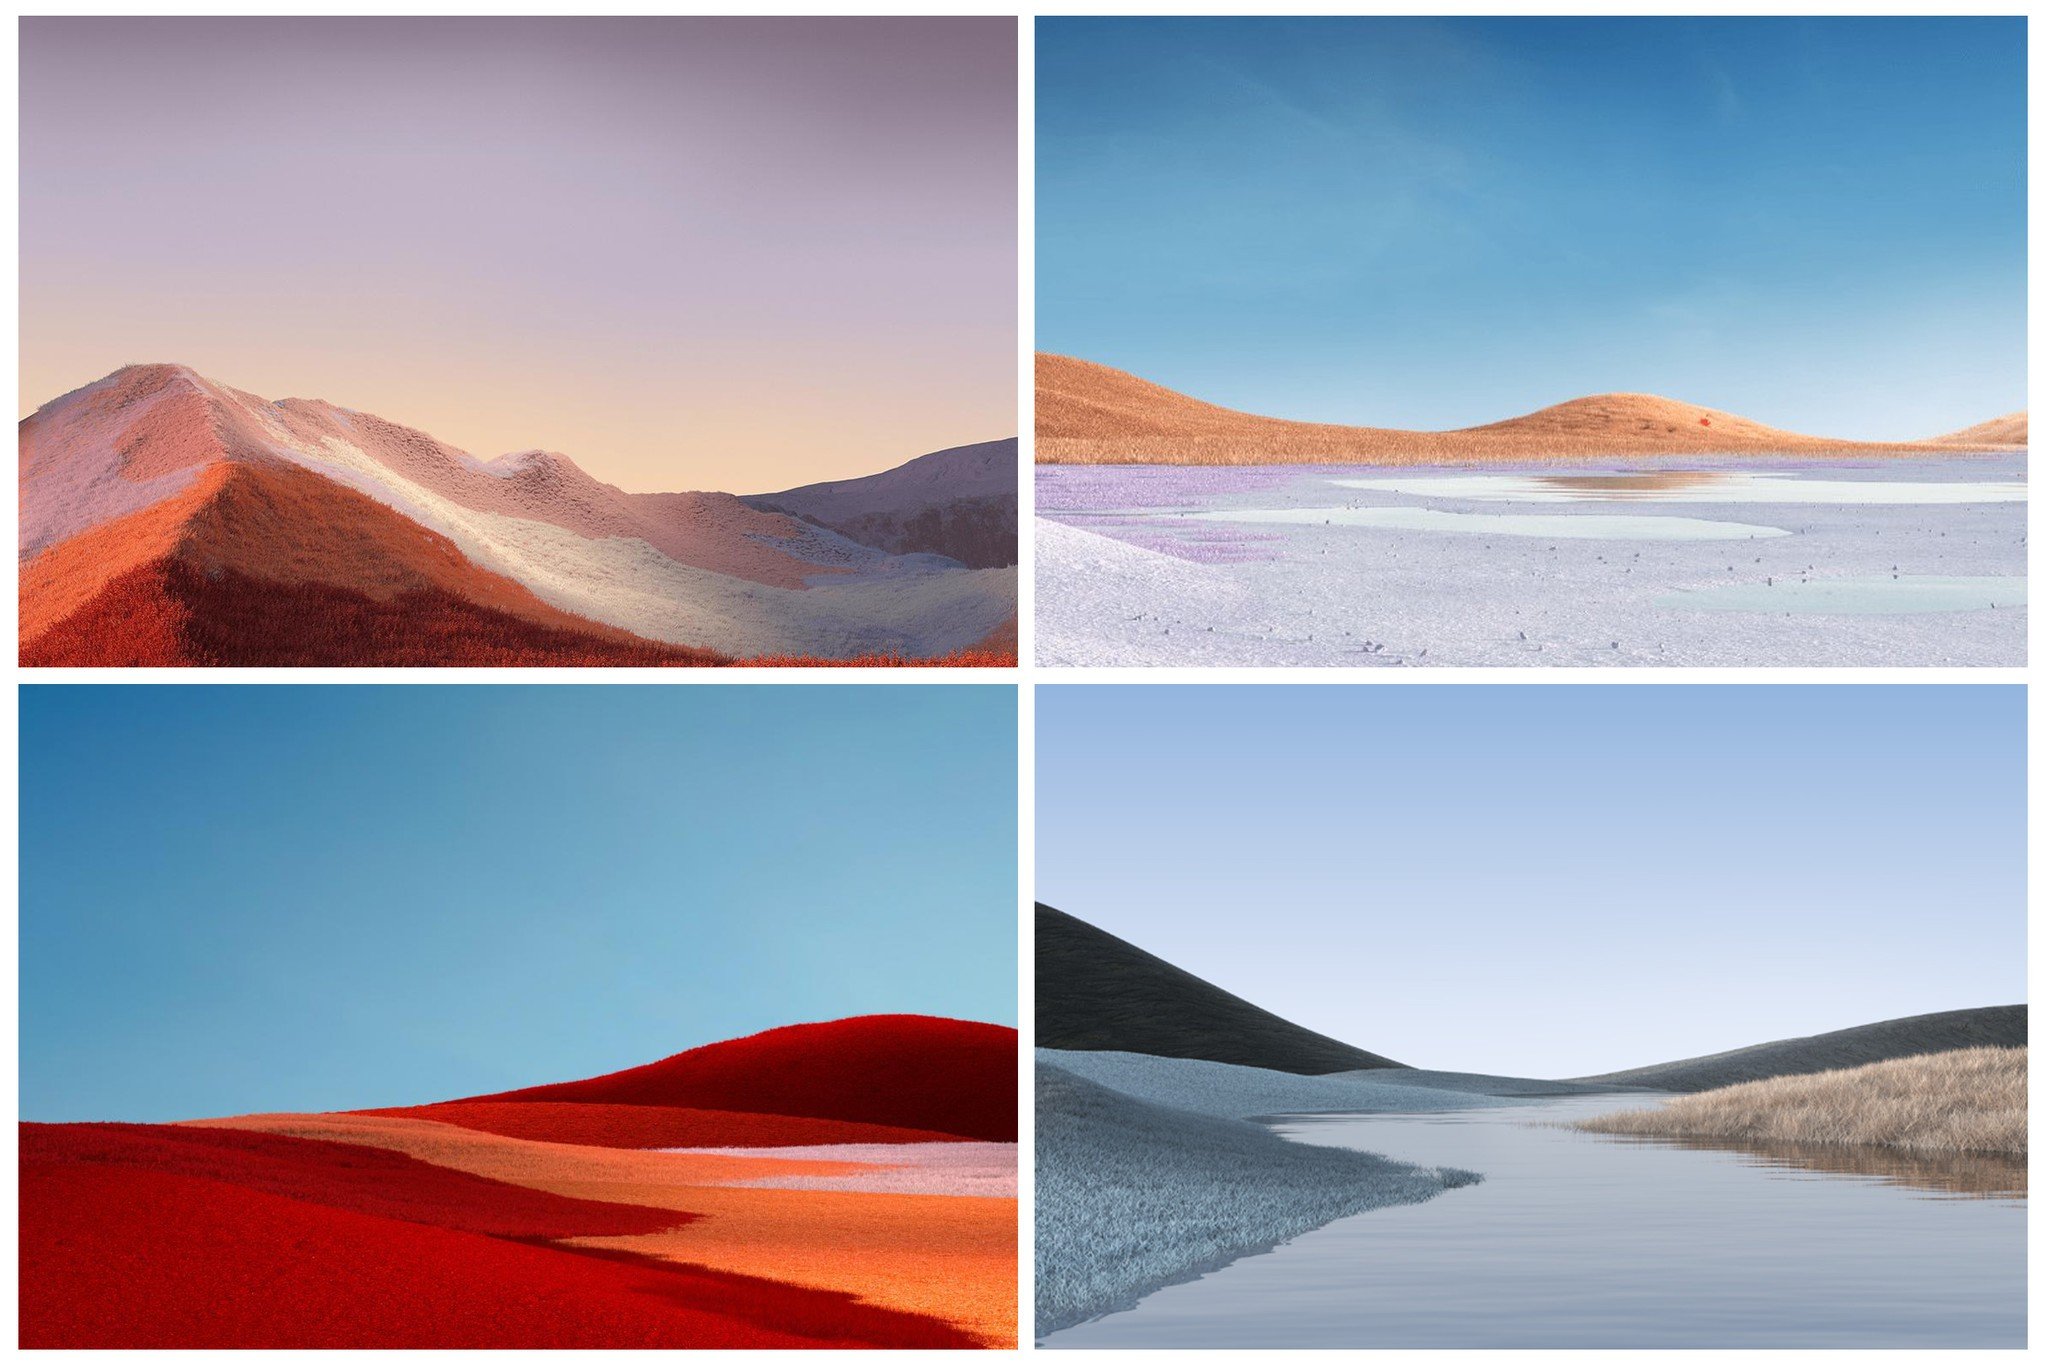 Alleged New Microsoft Surface Wallpapers Emerge Ahead Of Reveal Images, Photos, Reviews